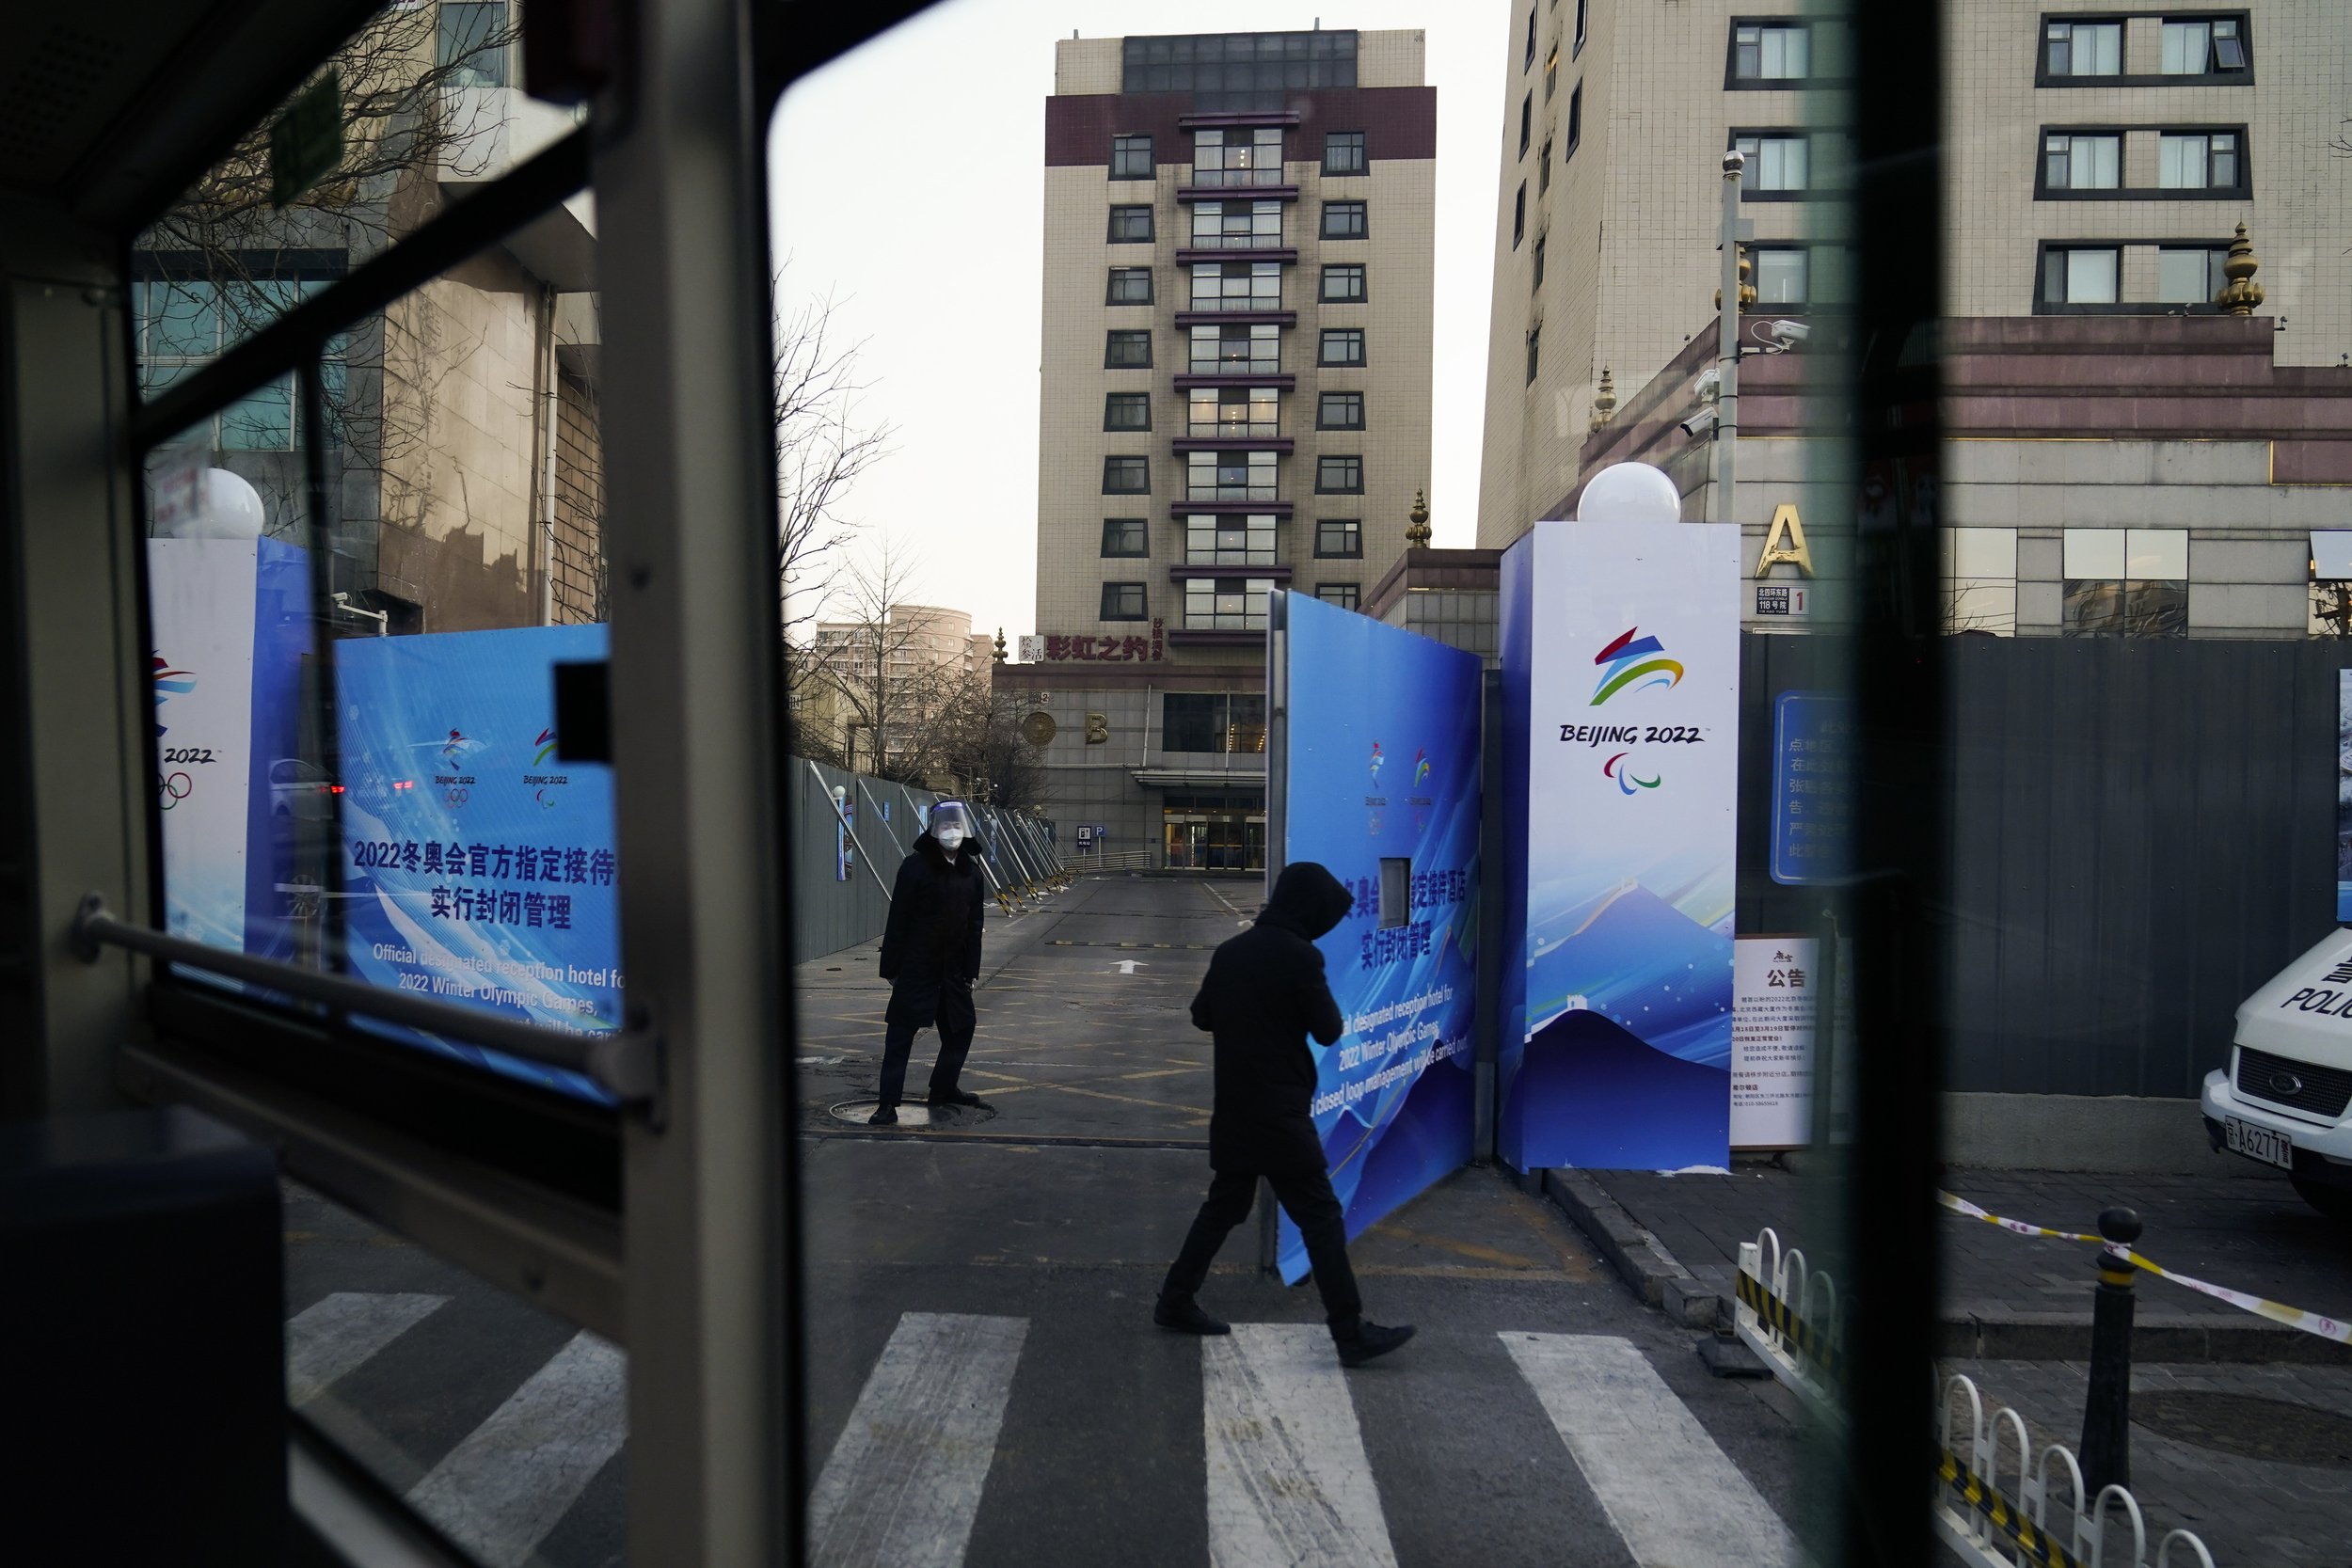  A guard opens the gate as an Olympic shuttle bus pulls into a hotel walled in by fences ahead of the 2022 Winter Olympics, Saturday, Jan. 29, 2022, in Beijing. (AP Photo/Jae C. Hong) 